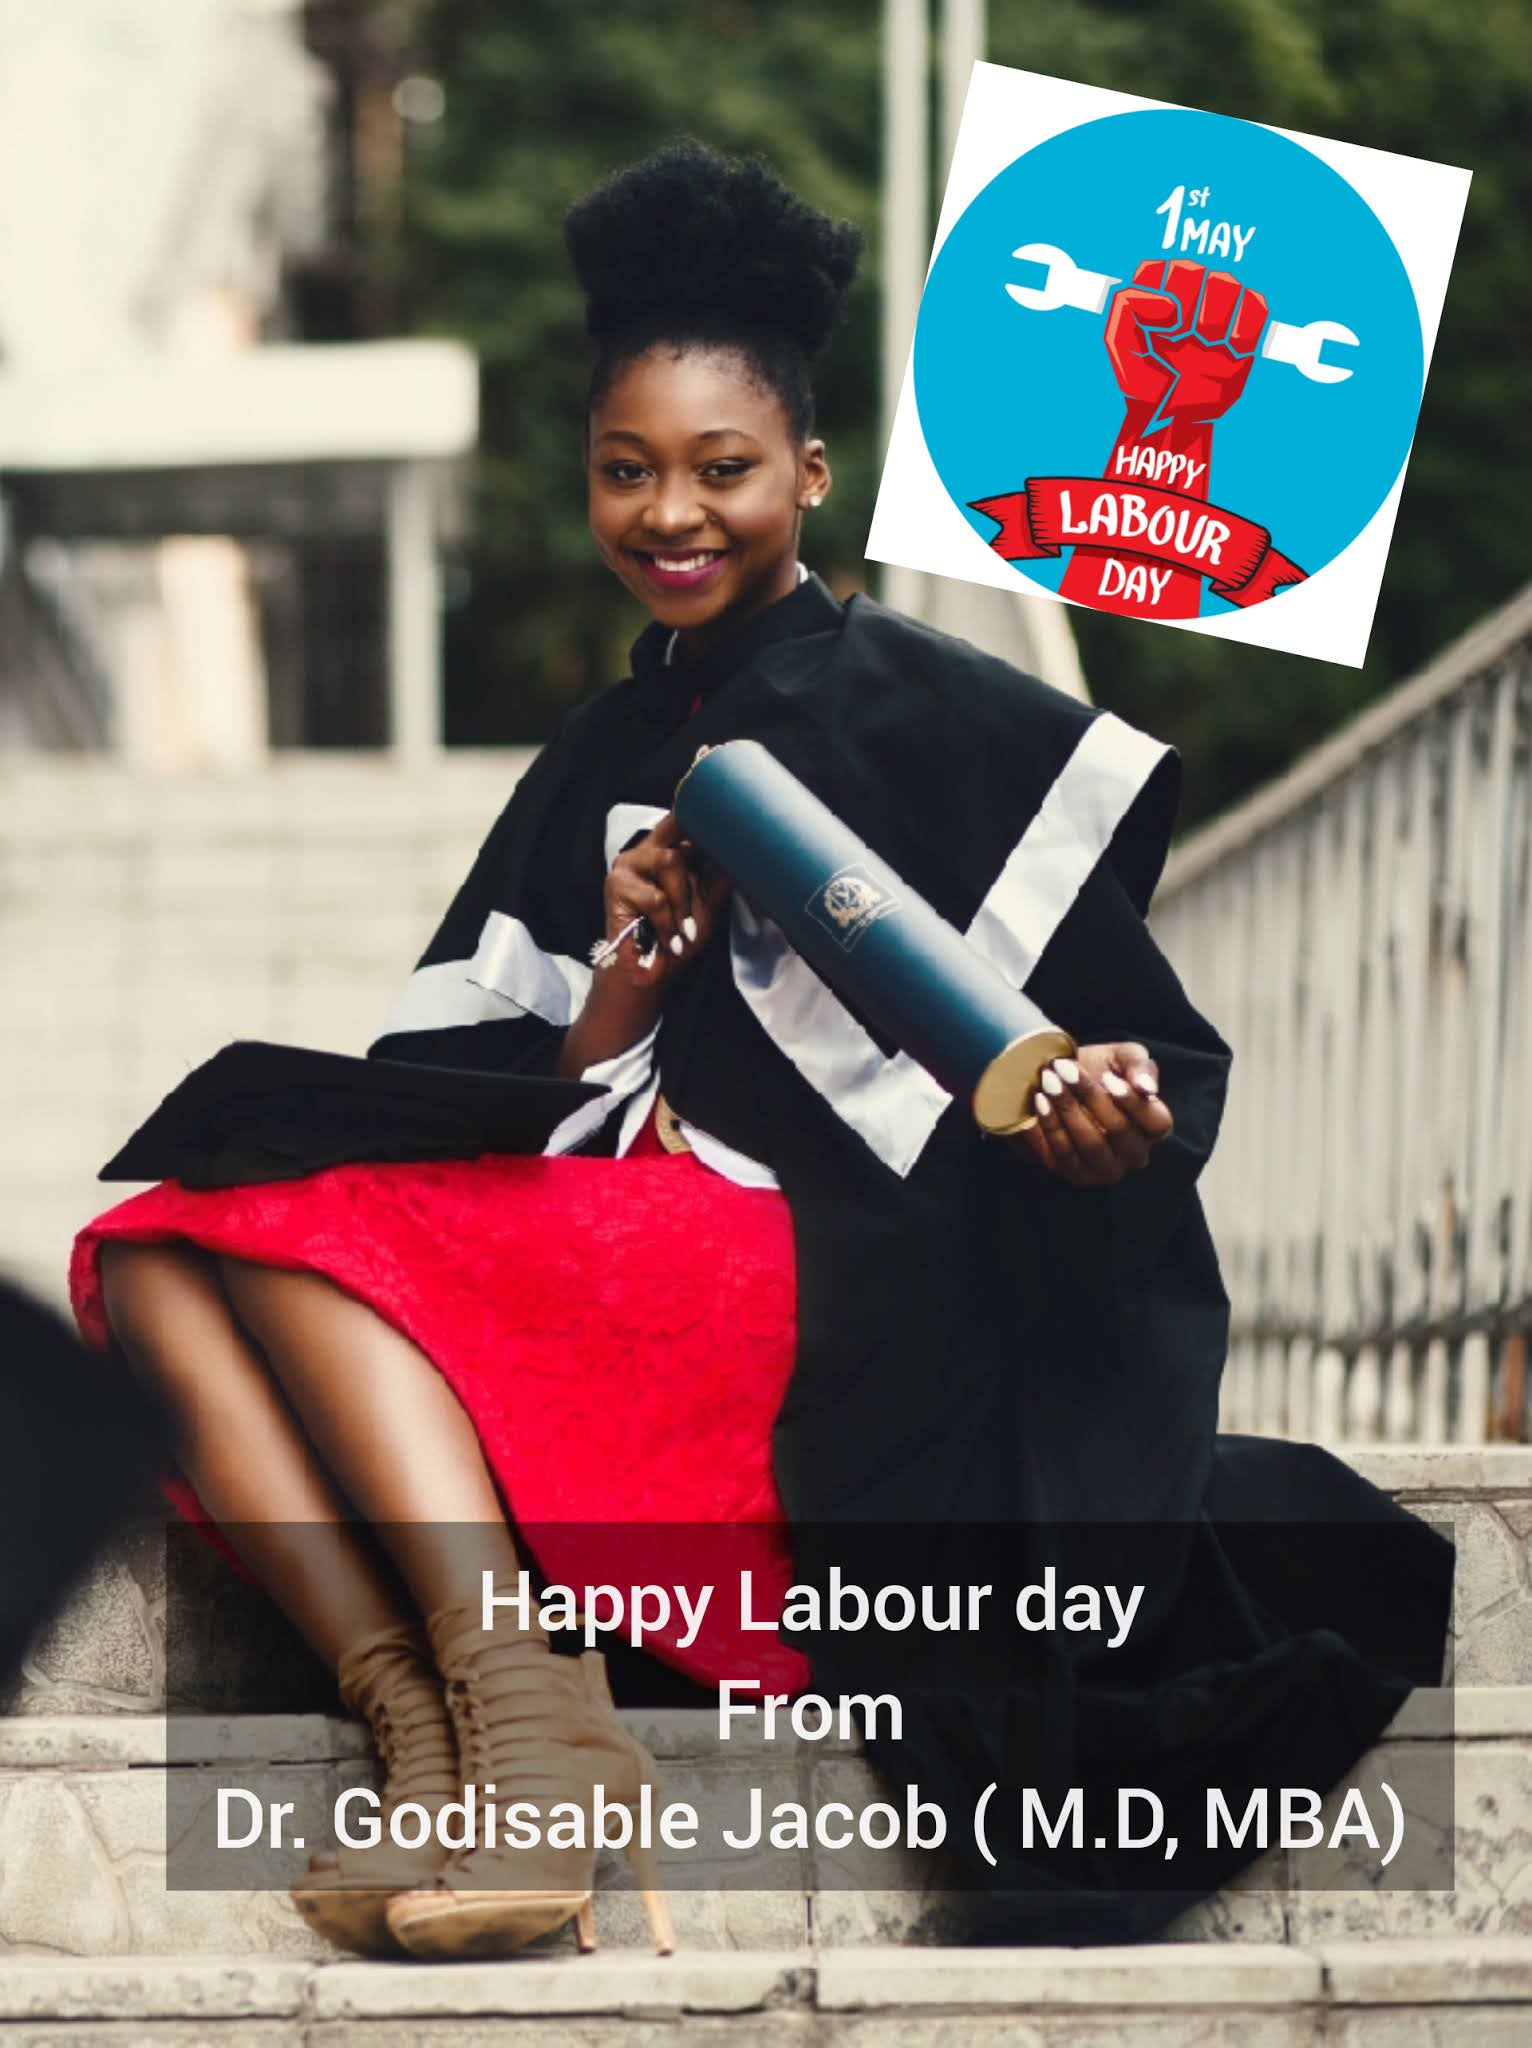 International Labour Day (May Day), May 1